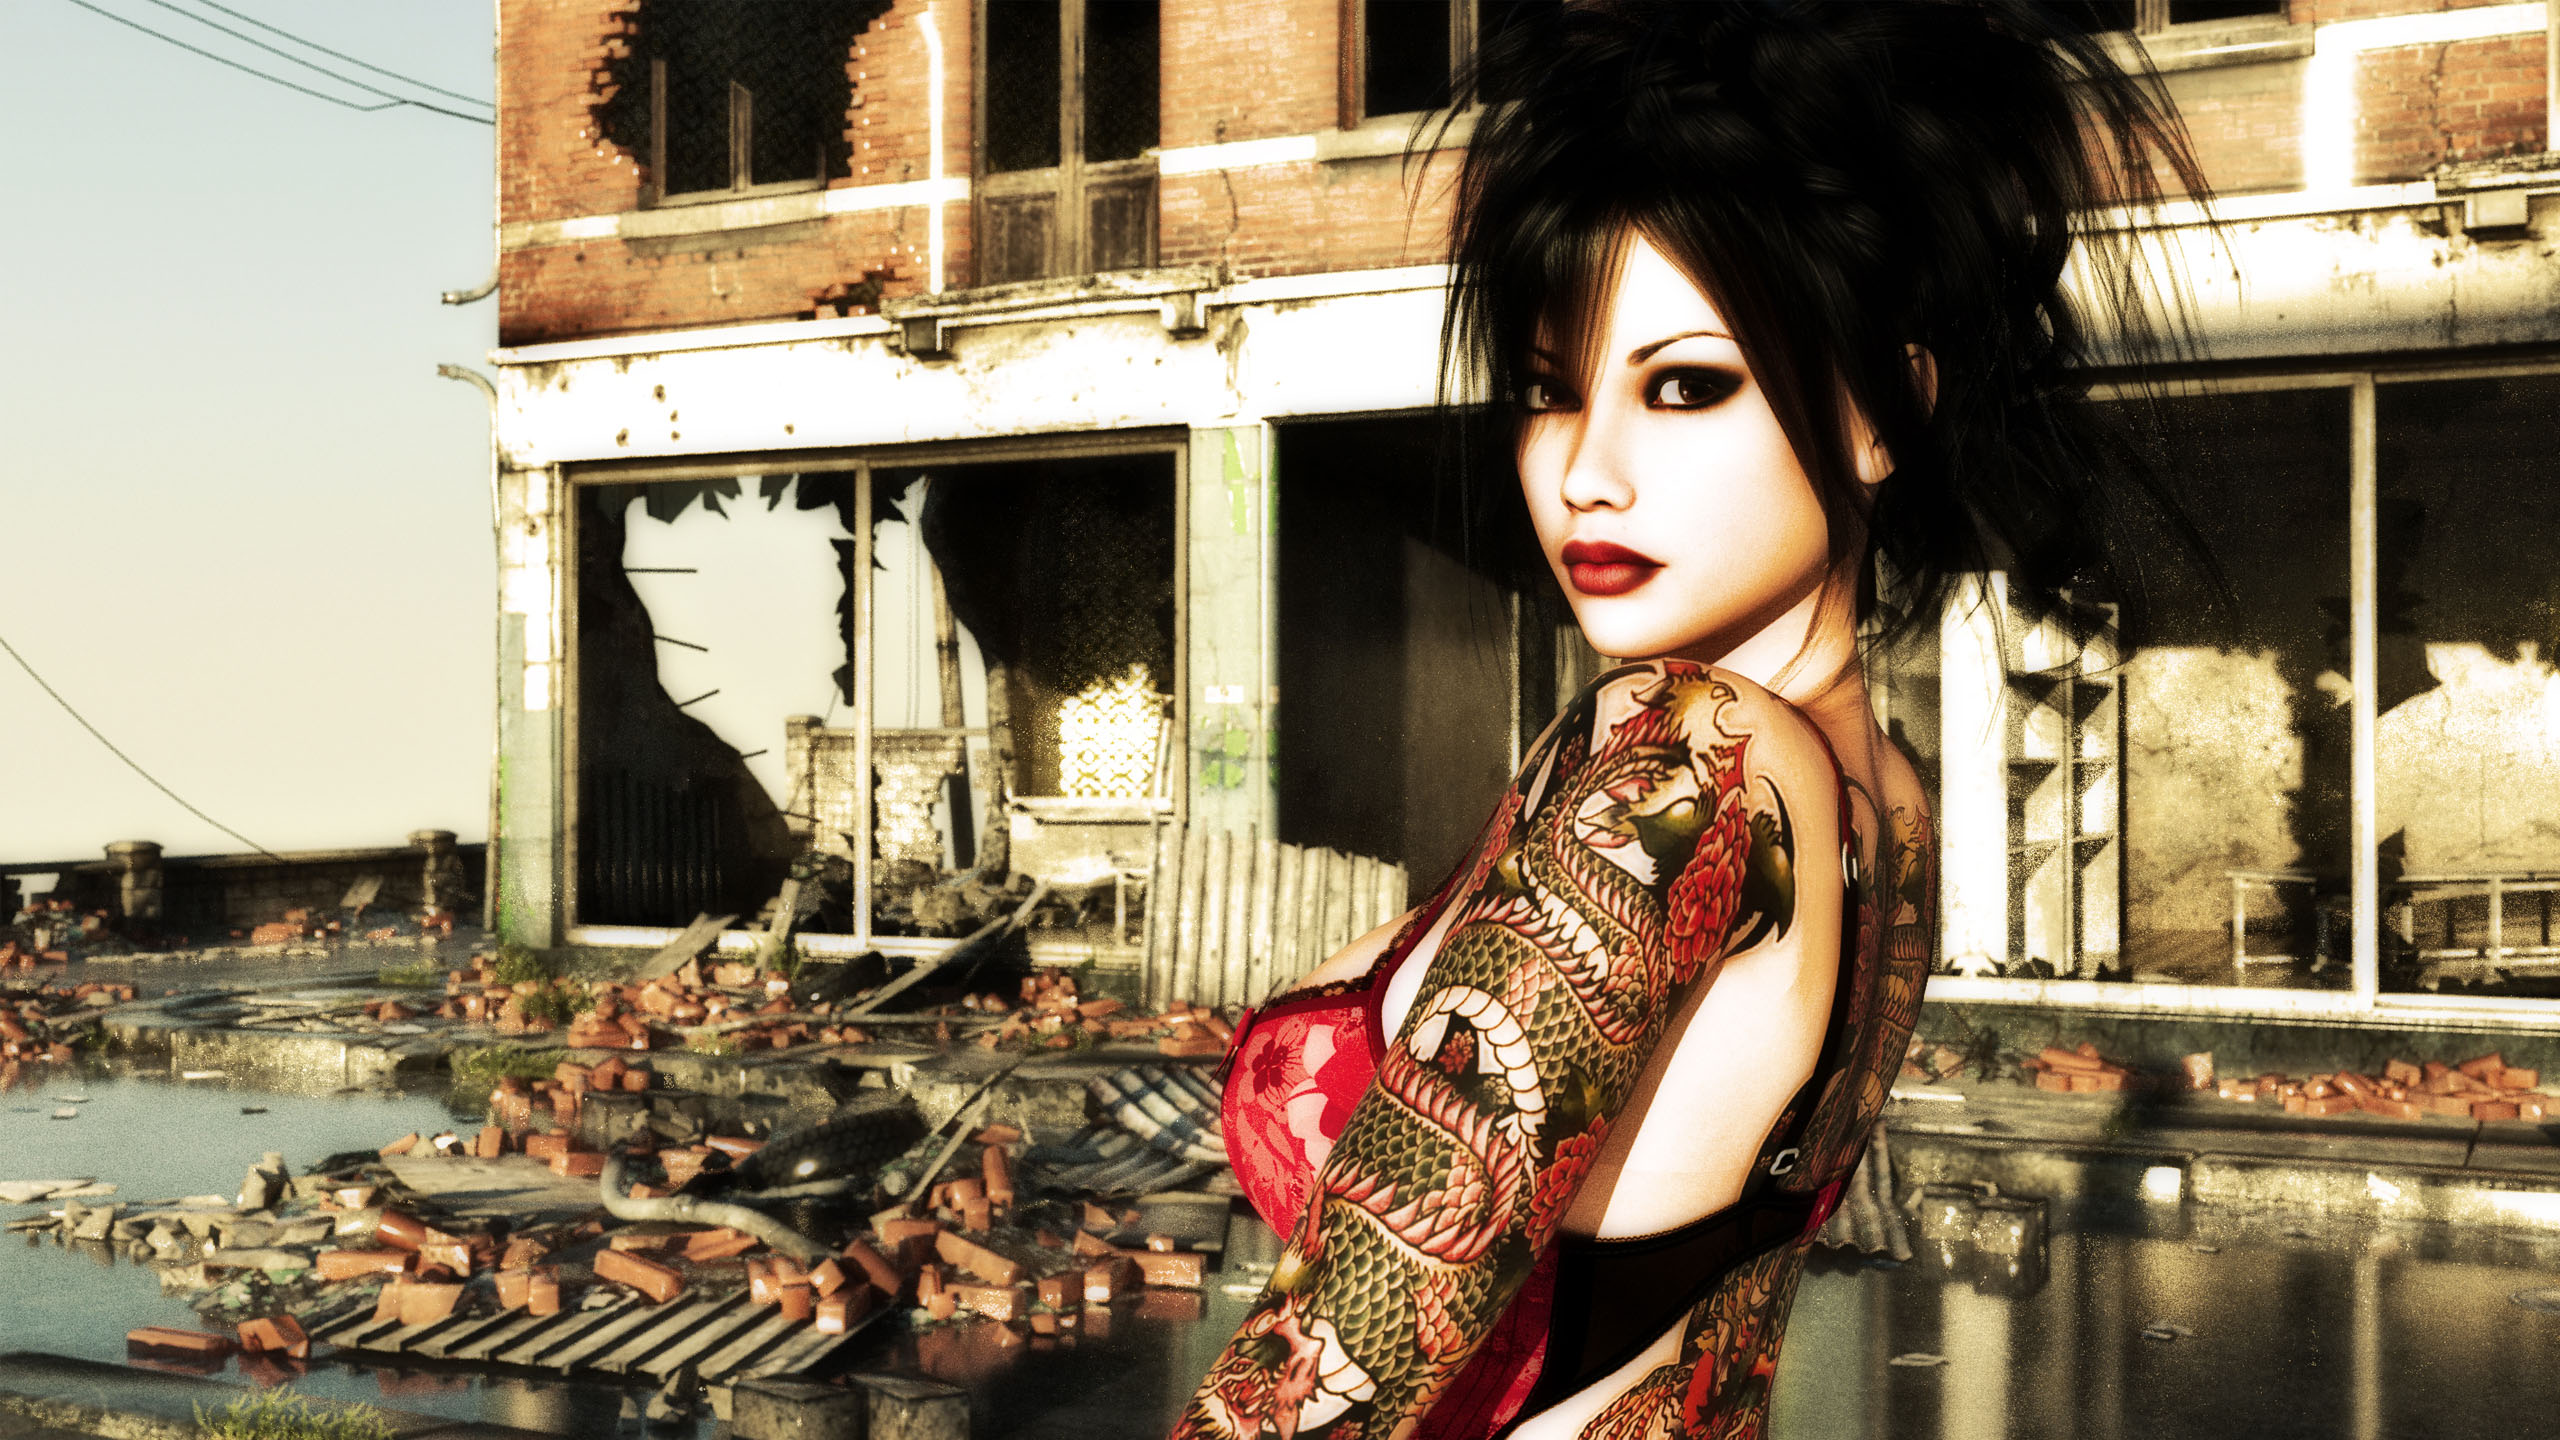 Image Tattooed Girl Daz 3d Wallpaper And Stock Photos